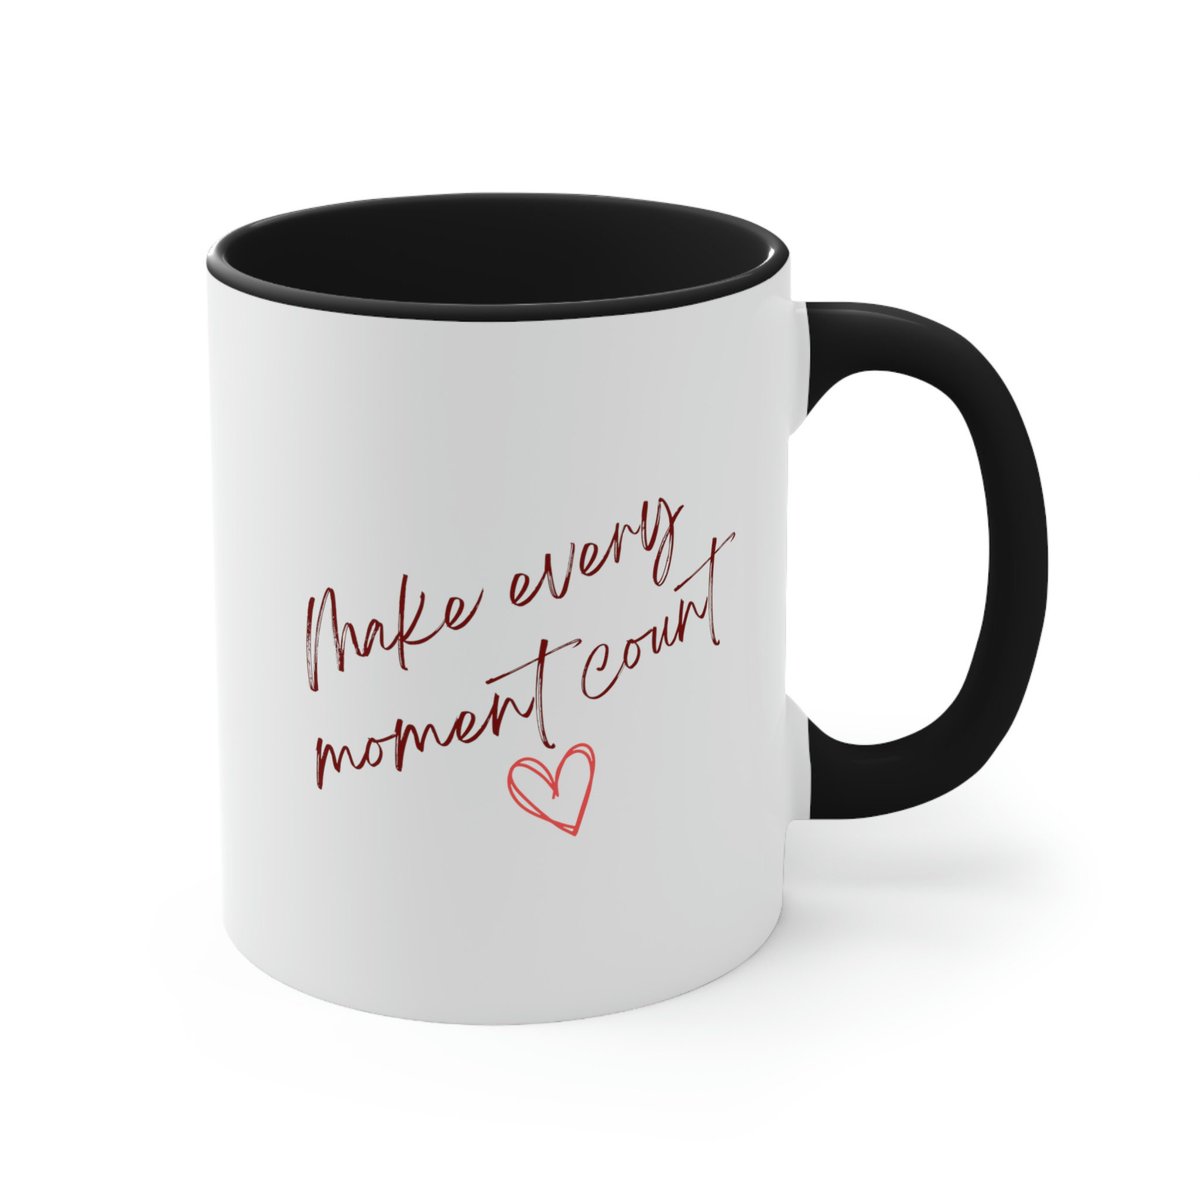 Excited to share the latest addition to my #etsy shop: Make Every Moment Count, Accent Coffee Mug, 11oz etsy.me/3XER3xr #everymomentcounts #momentscount #makemoments #makemomentscount #thoughtfulgift #thoughtfulmug #kyle #cancersucks